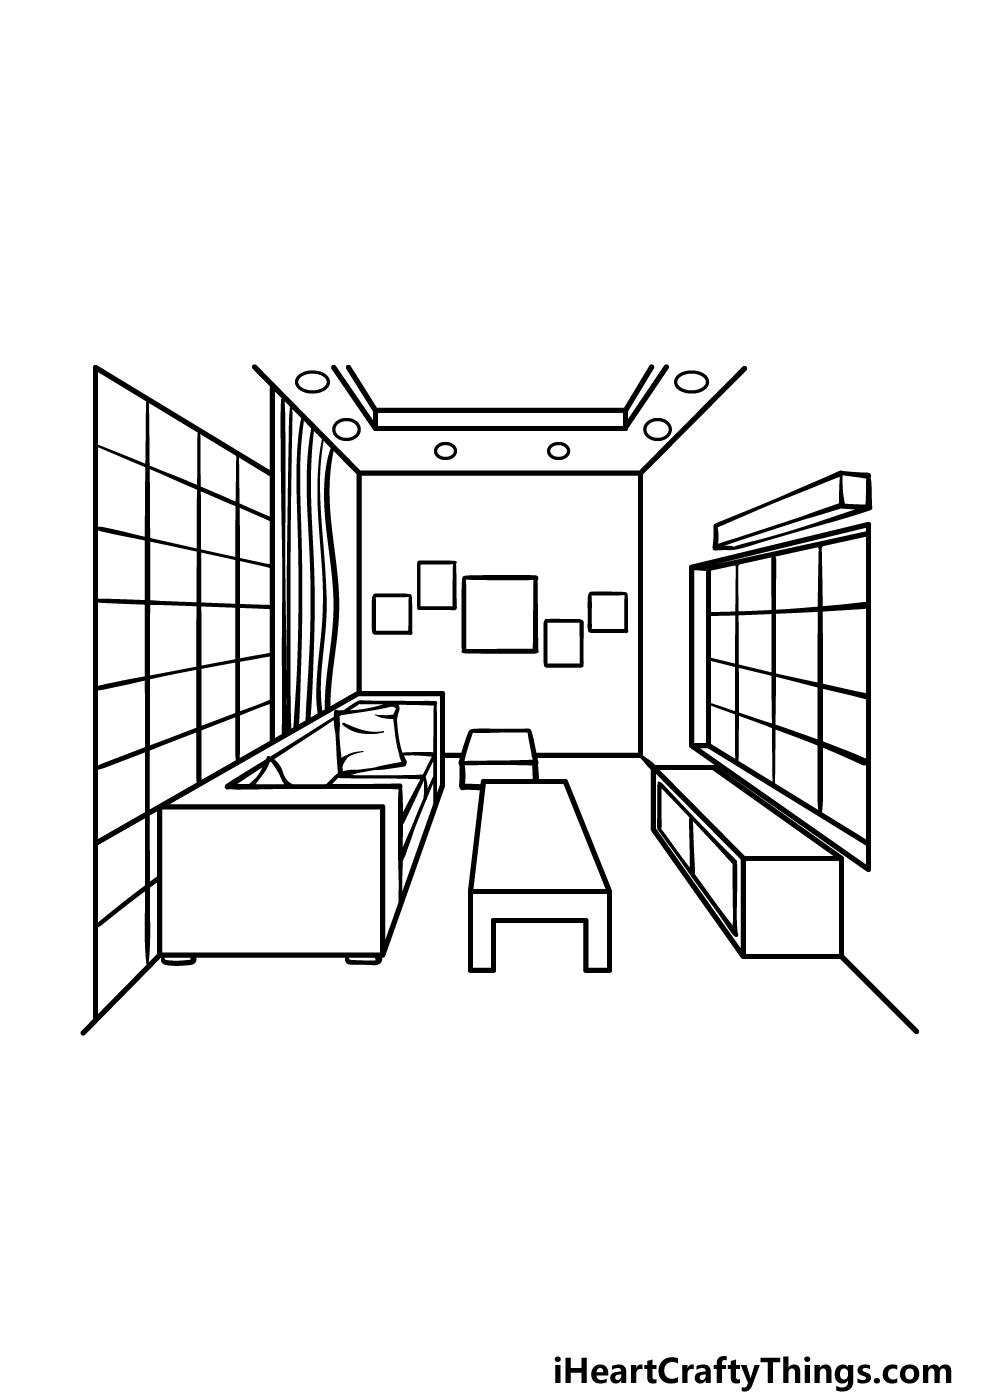 how to draw a Room Perspective step 5